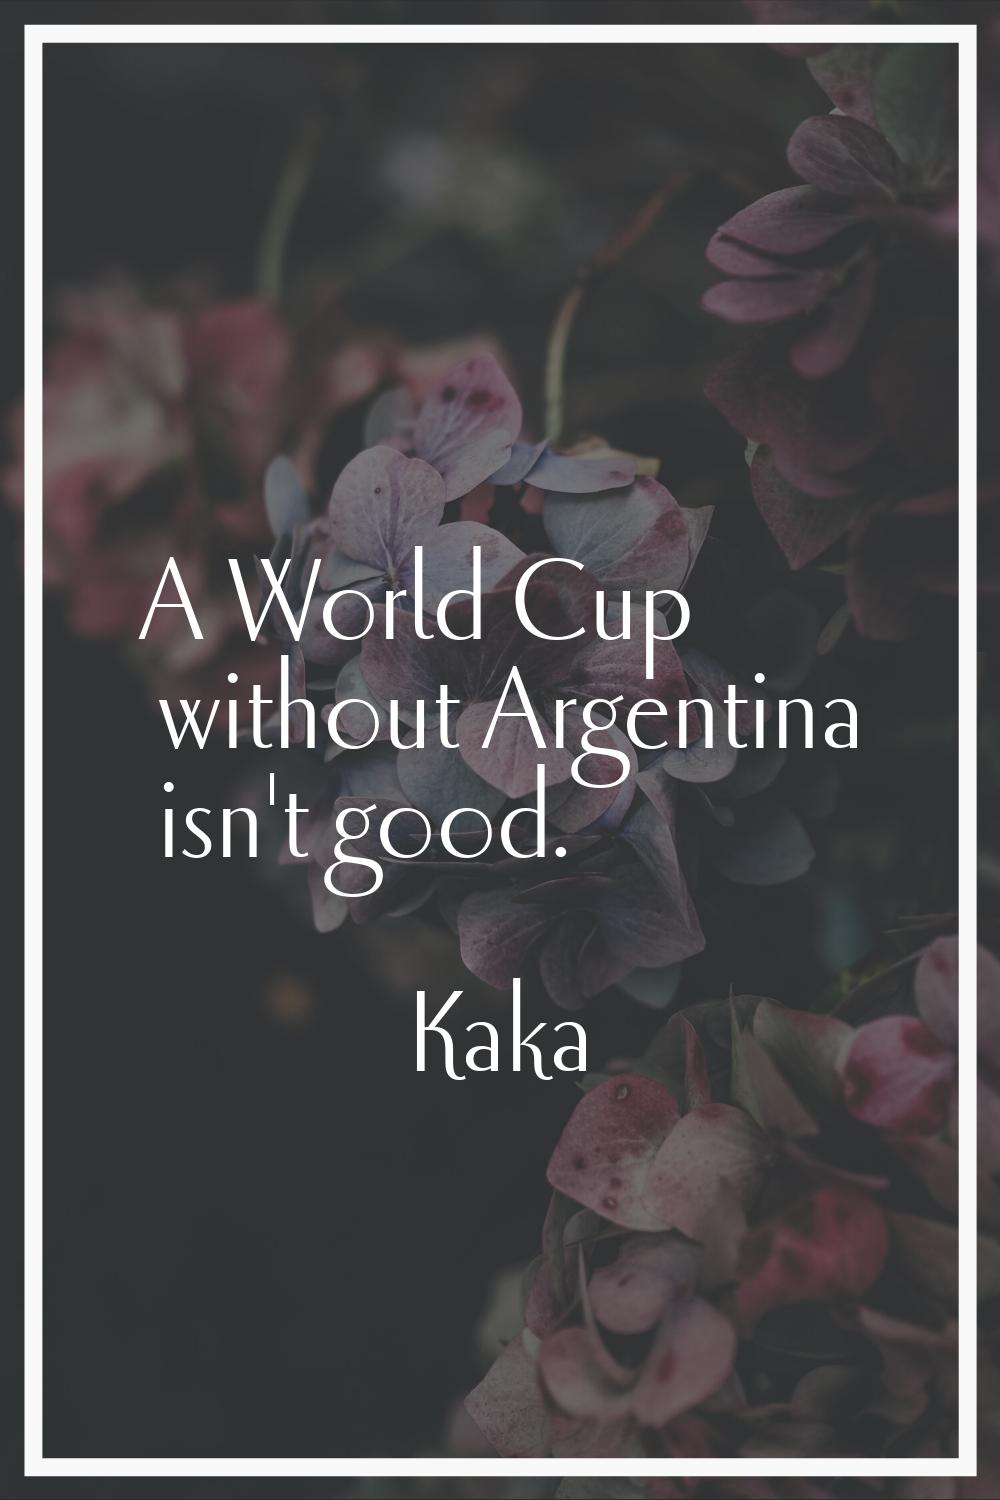 A World Cup without Argentina isn't good.